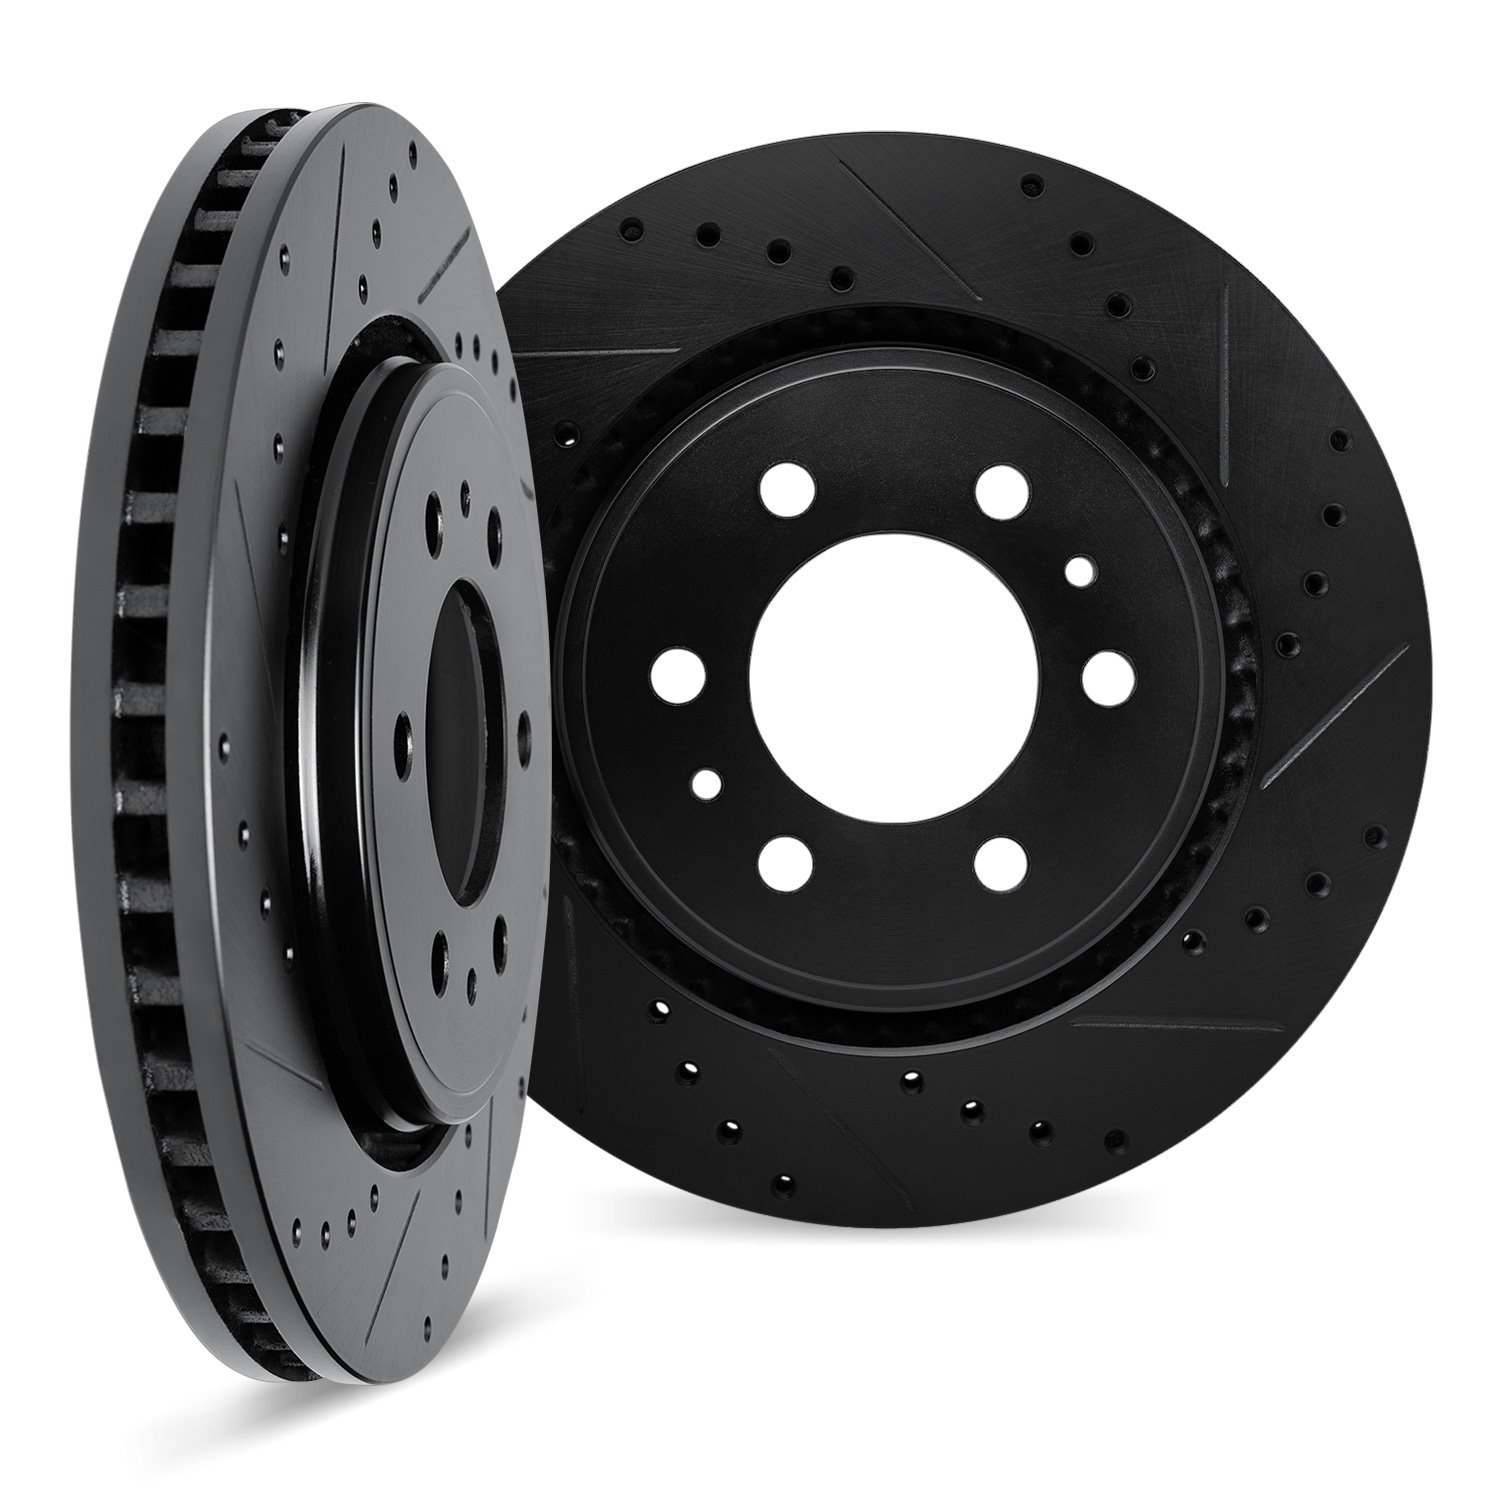 8002-76066 Drilled/Slotted Brake Rotors [Black], 1981-1989 Lexus/Toyota/Scion, Position: Front